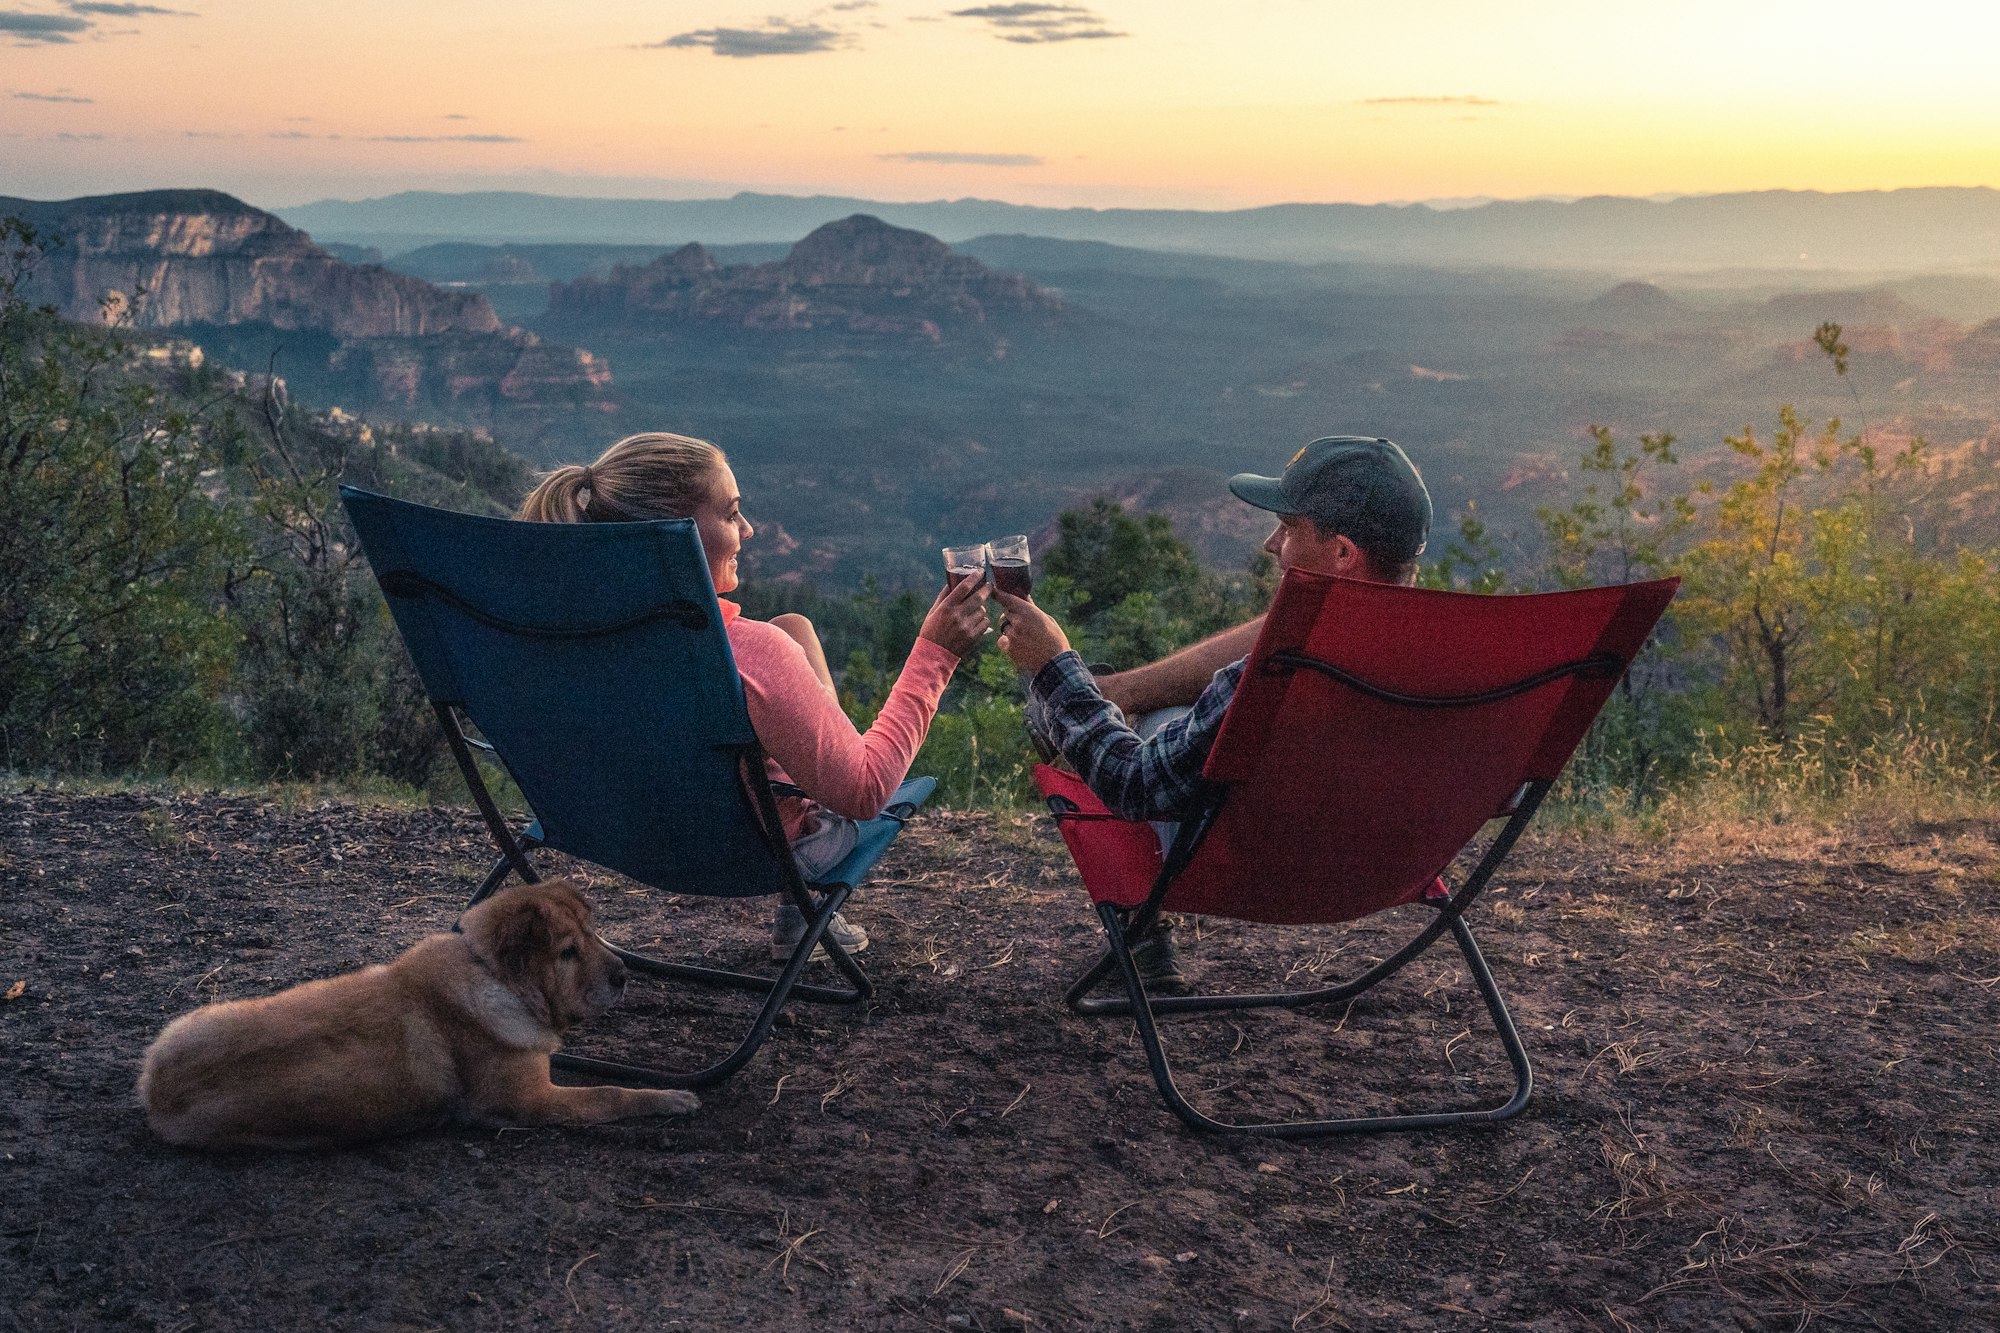 Best Camping Chairs Of 2022- A Complete Guide To The Best Ultralight Backpacking Chairs Of 2022